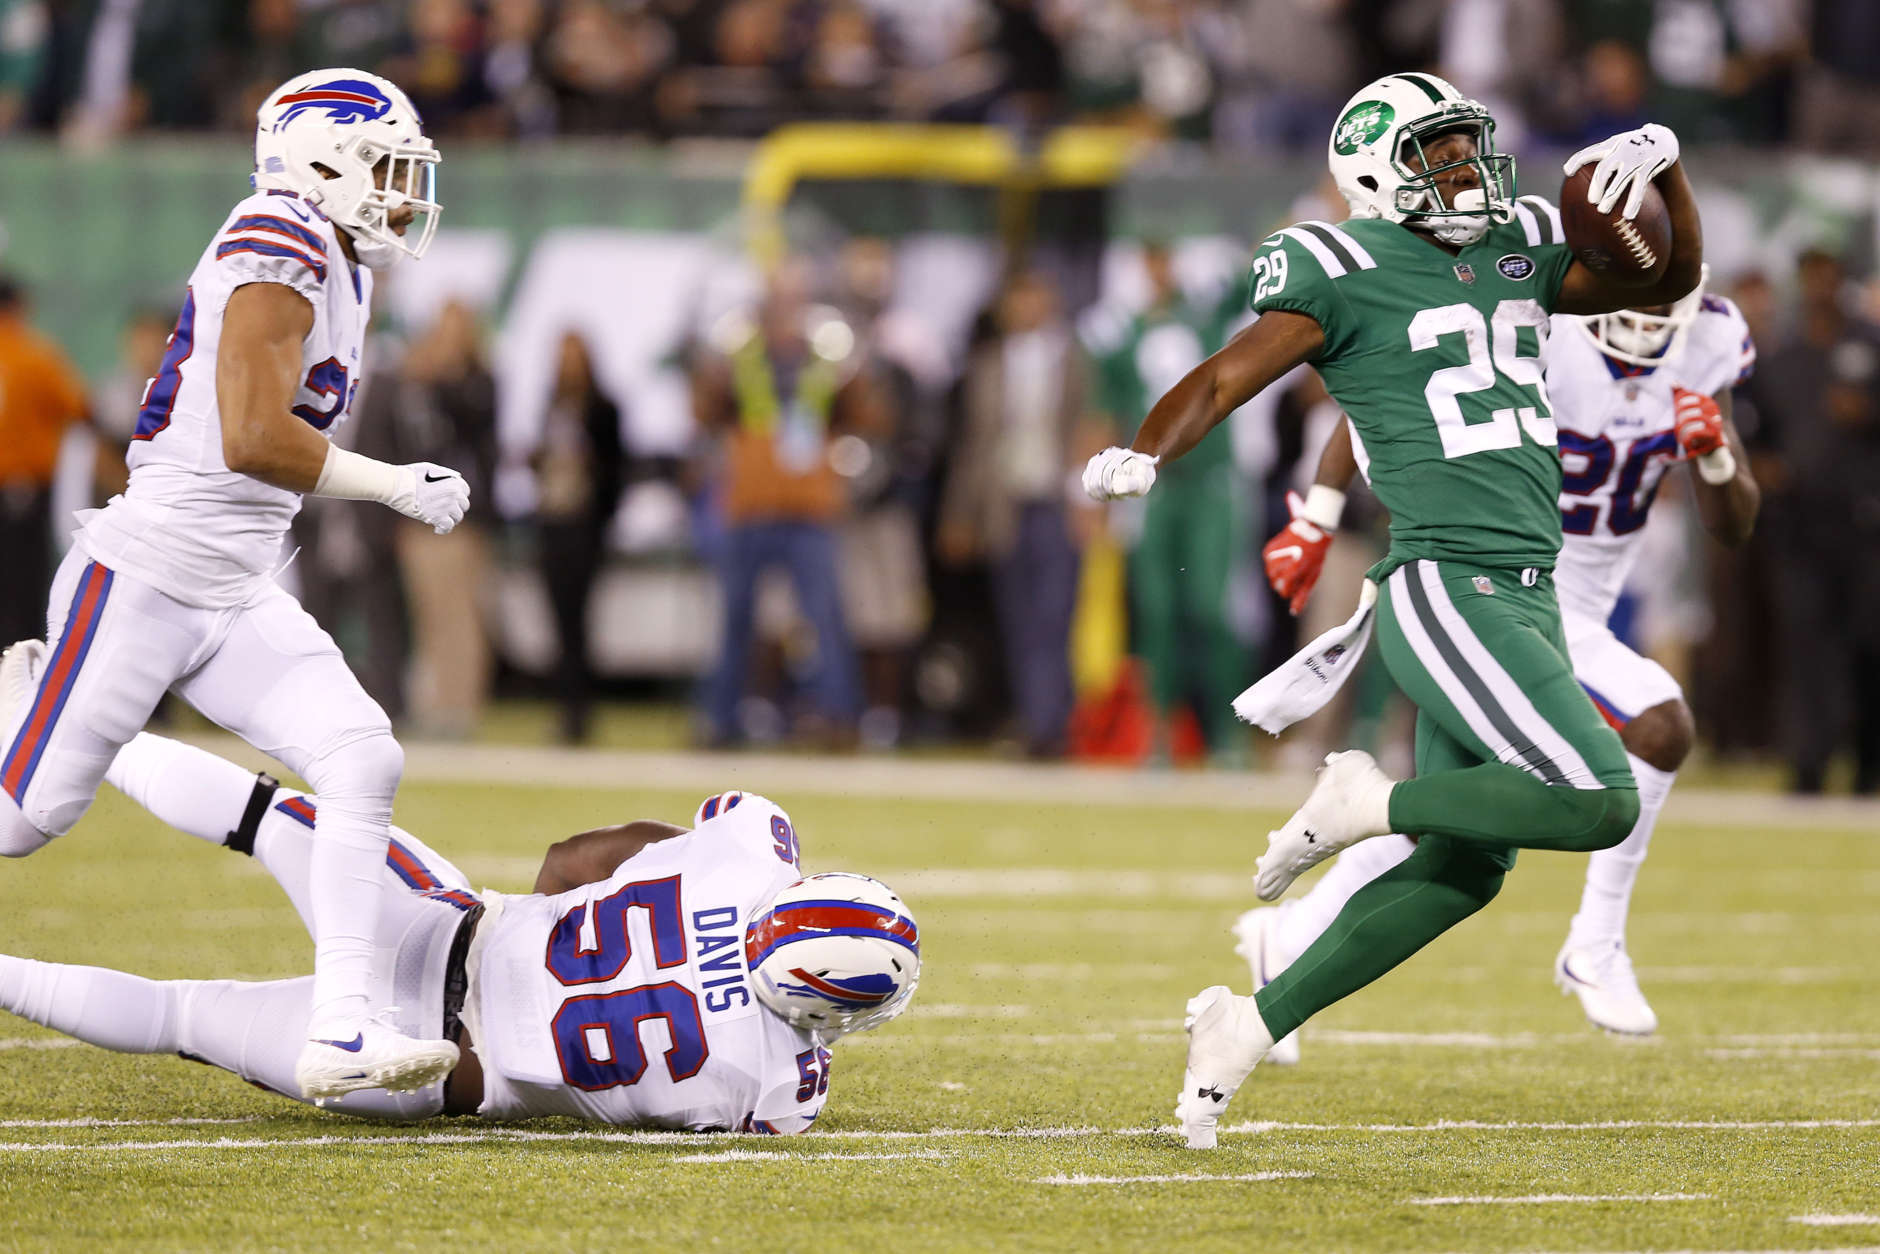 New York Jets running back Bilal Powell, right, avoids being tripped up by Buffalo Bills defensive end Ryan Davis (56) on a long run during the second half of an NFL football game, Thursday, Nov. 2, 2017, in East Rutherford, N.J. (AP Photo/Kathy Willens)